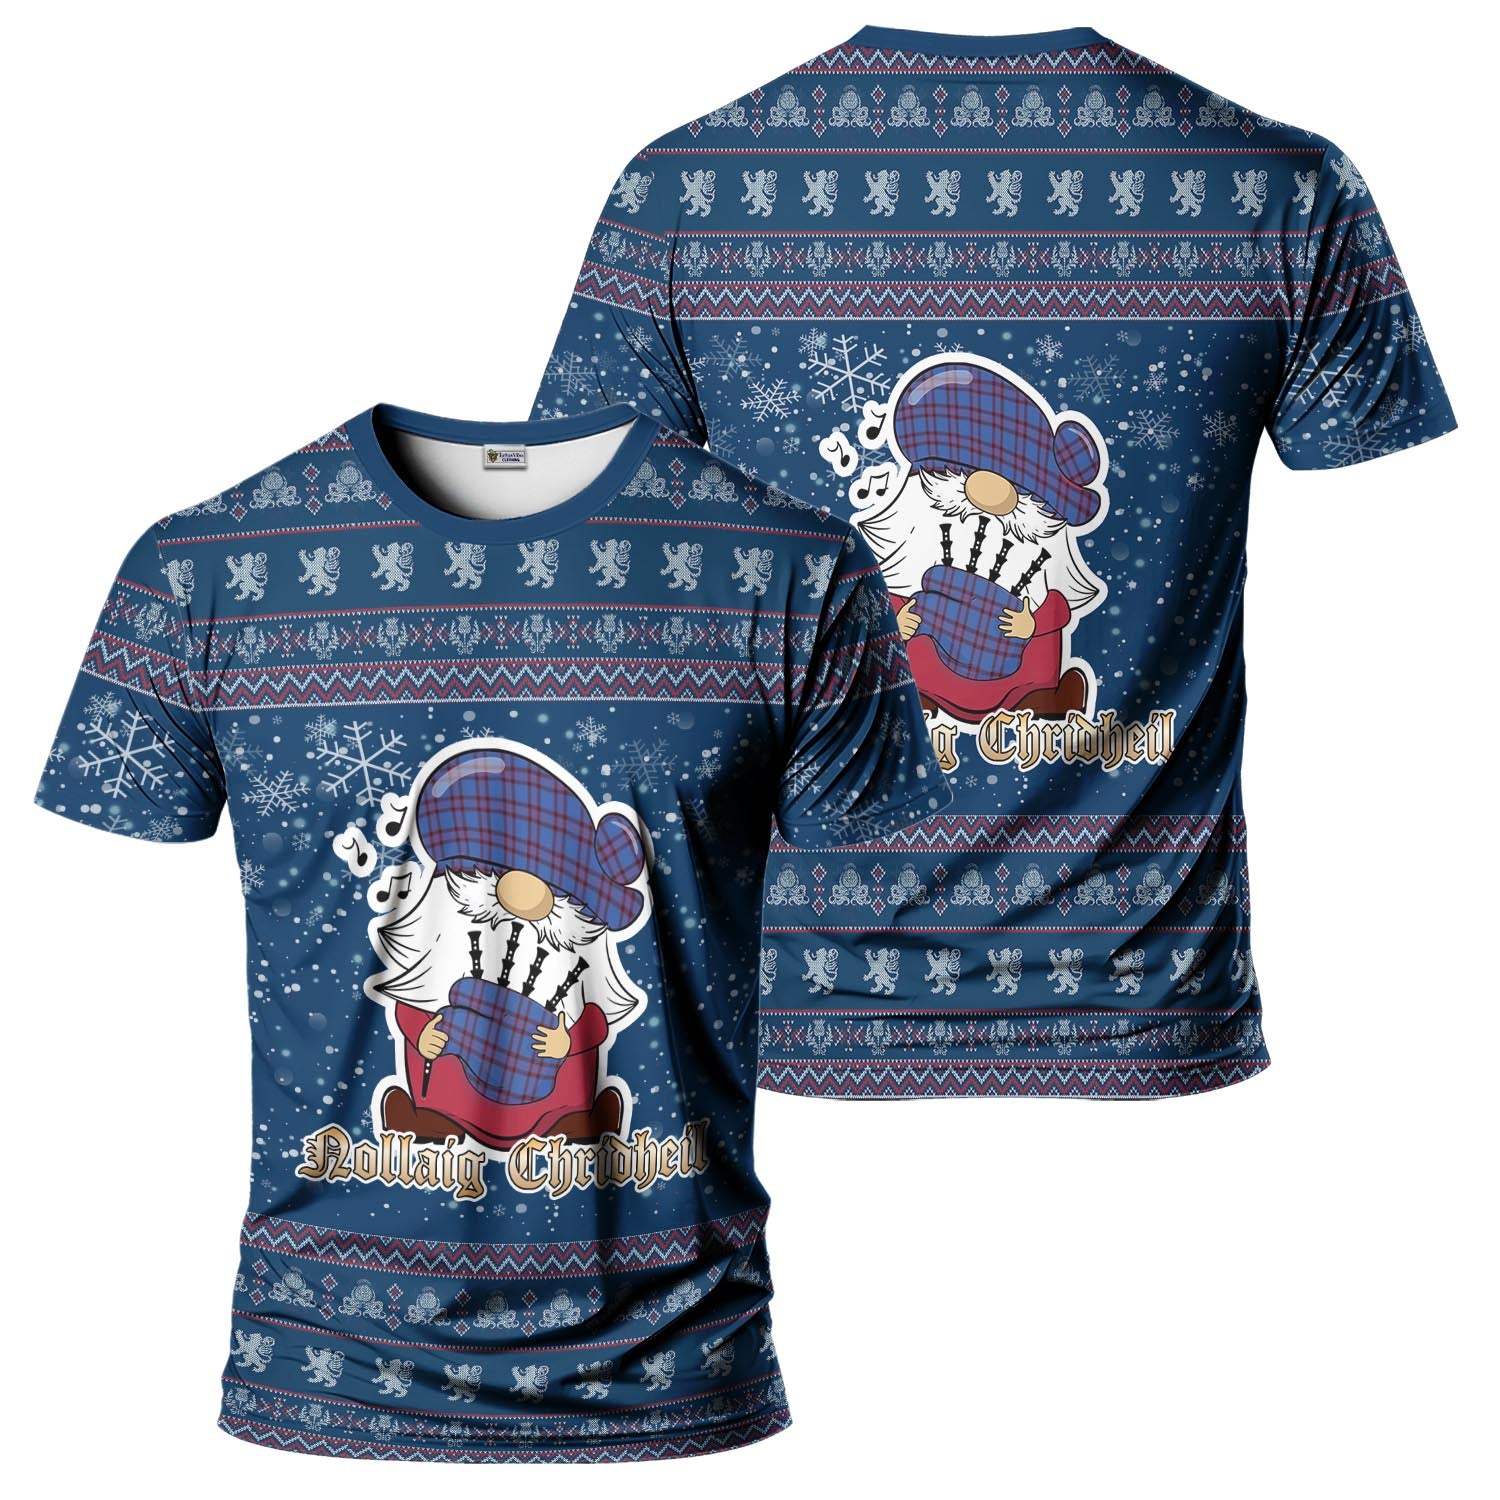 Elliot Modern Clan Christmas Family T-Shirt with Funny Gnome Playing Bagpipes Kid's Shirt Blue - Tartanvibesclothing